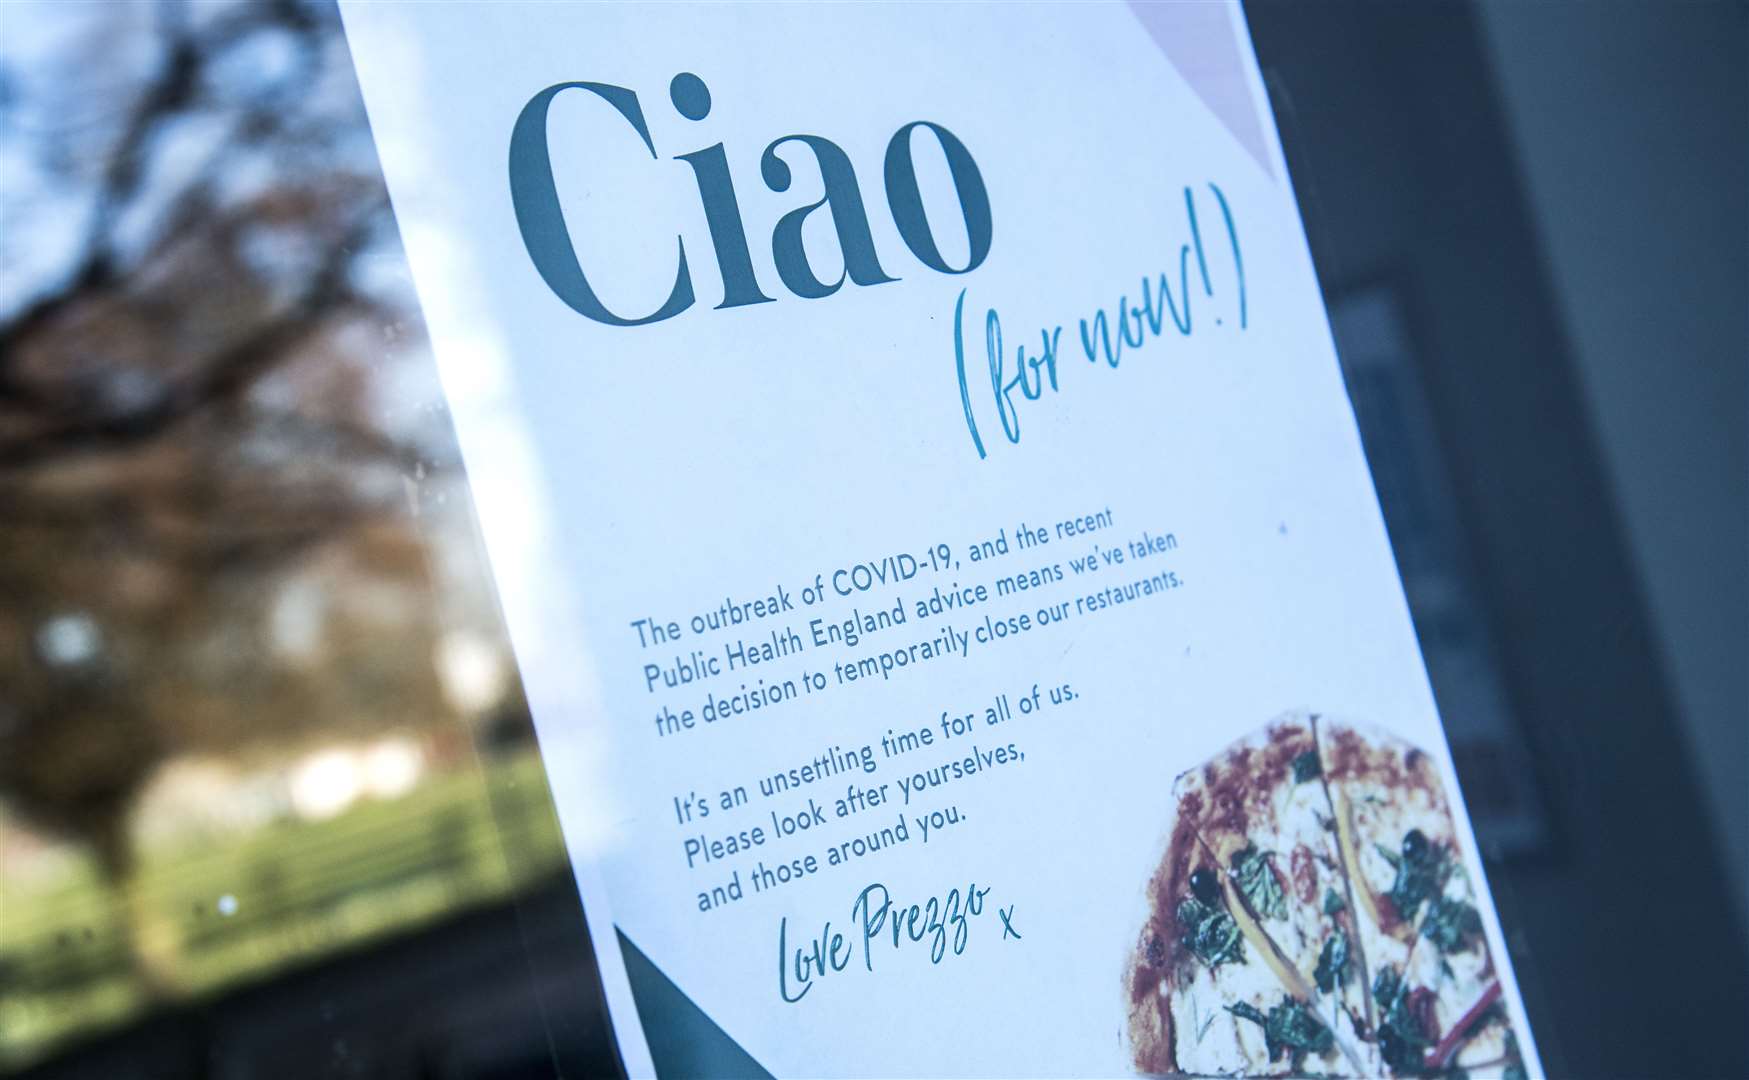 Prezzo temporarily closed all of its sites after the pandemic struck the UK in March (Ian West/PA)